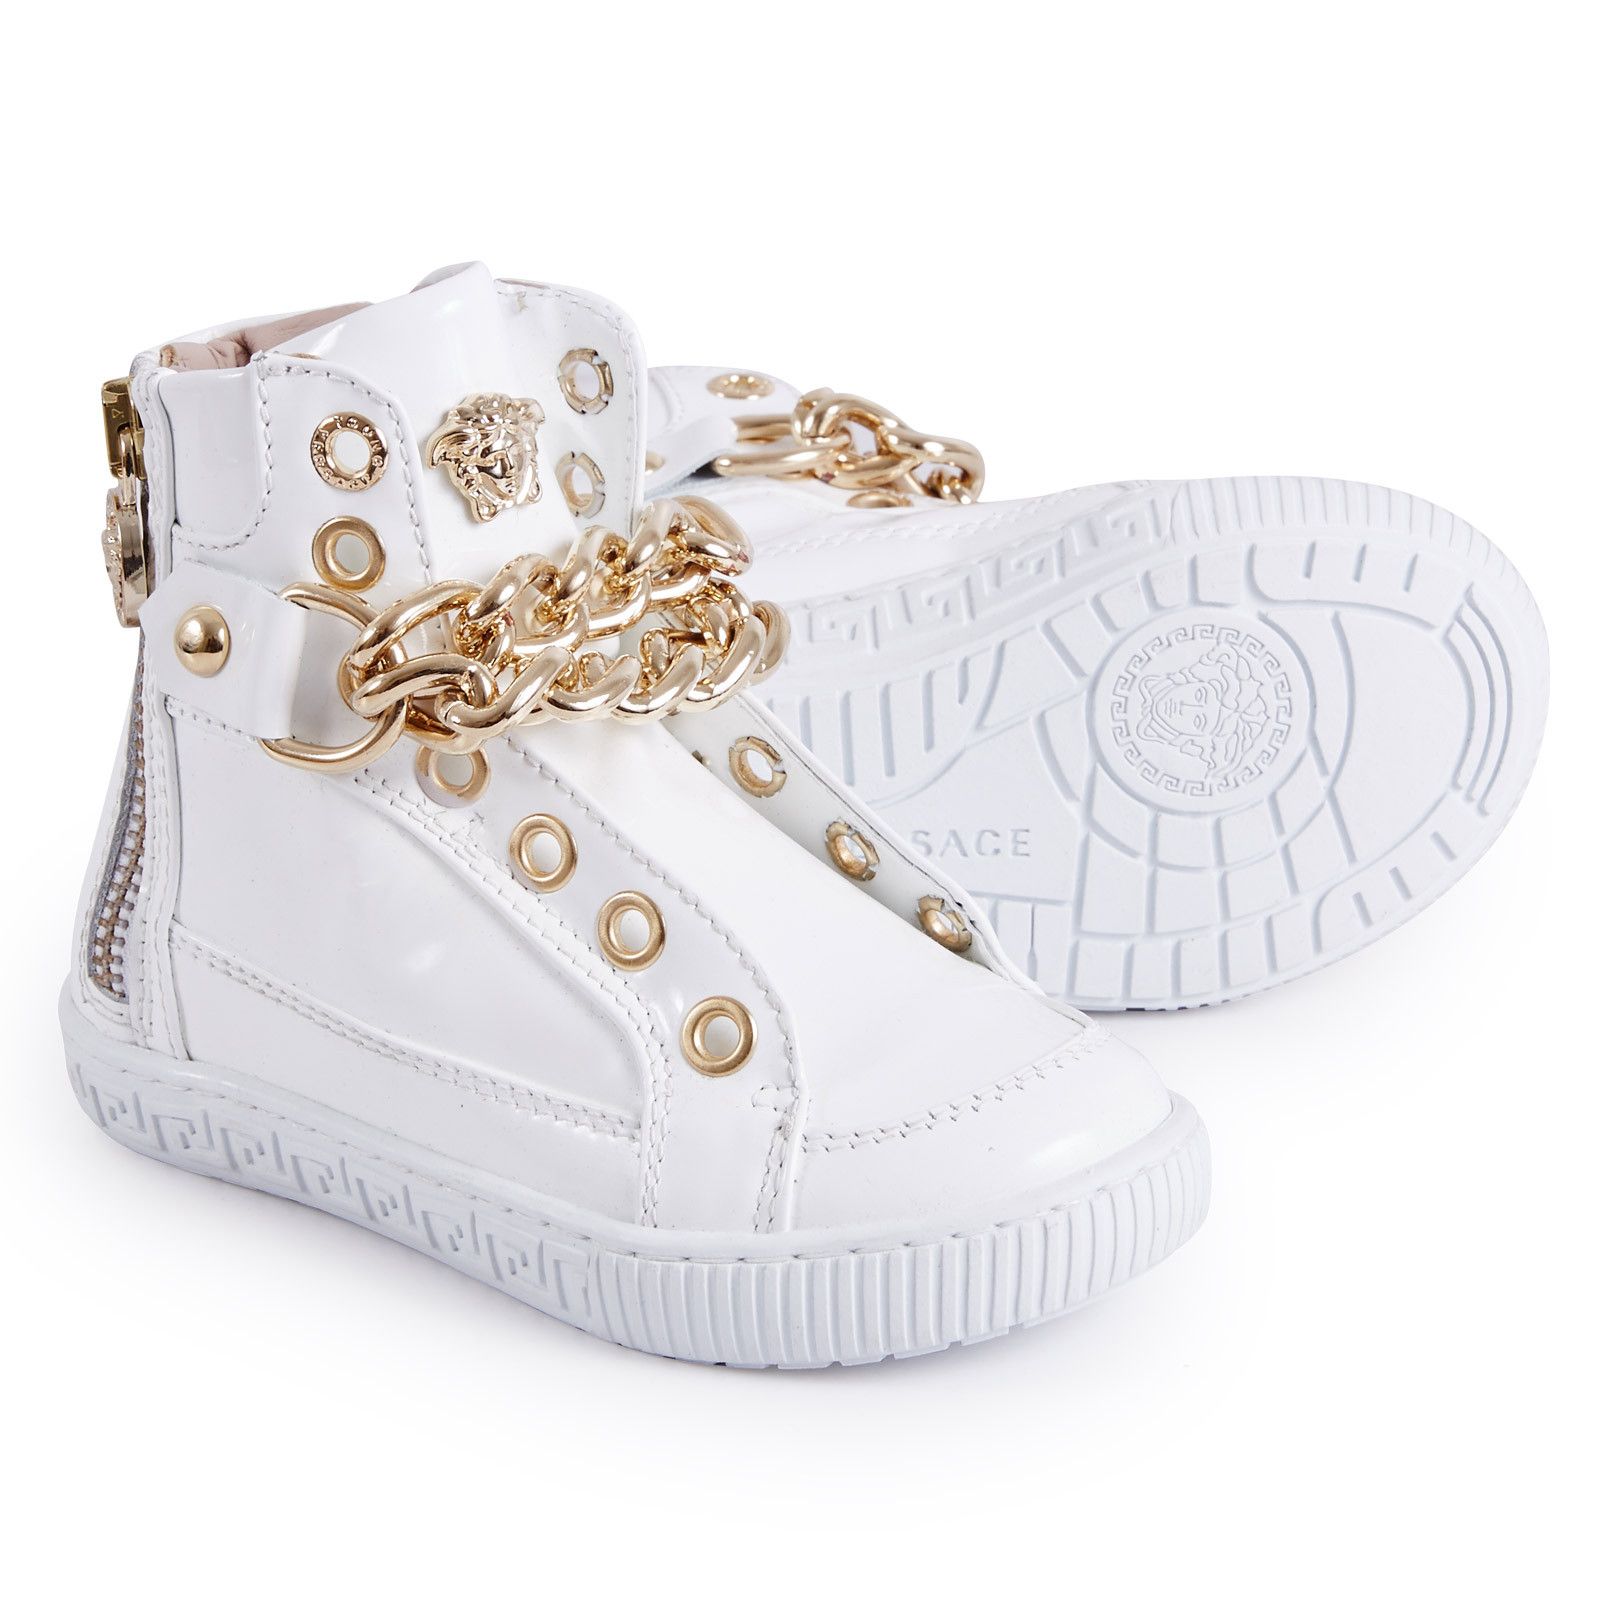 Girls White Patent Leather High-Top Trainers - CÉMAROSE | Children's Fashion Store - 3